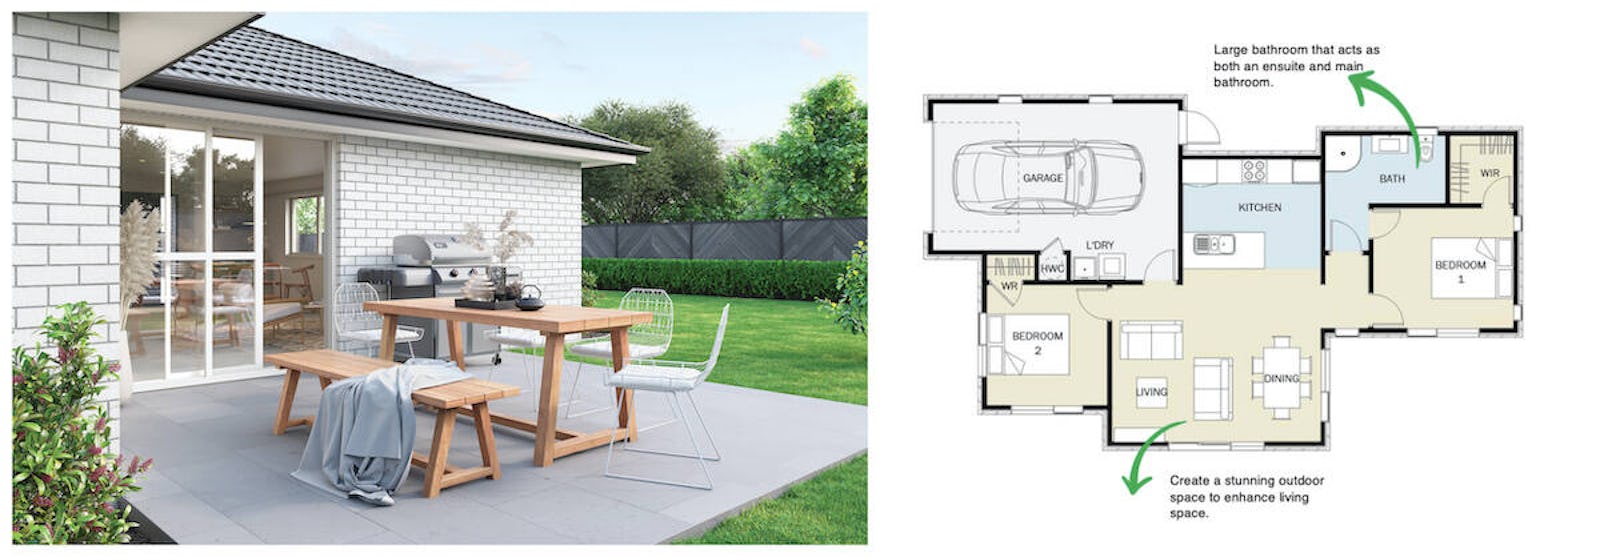 Modern, warm and low maintenance, our Tuke plan is perfect for those wanting easy living with all of the necessities in an open plan layout.  